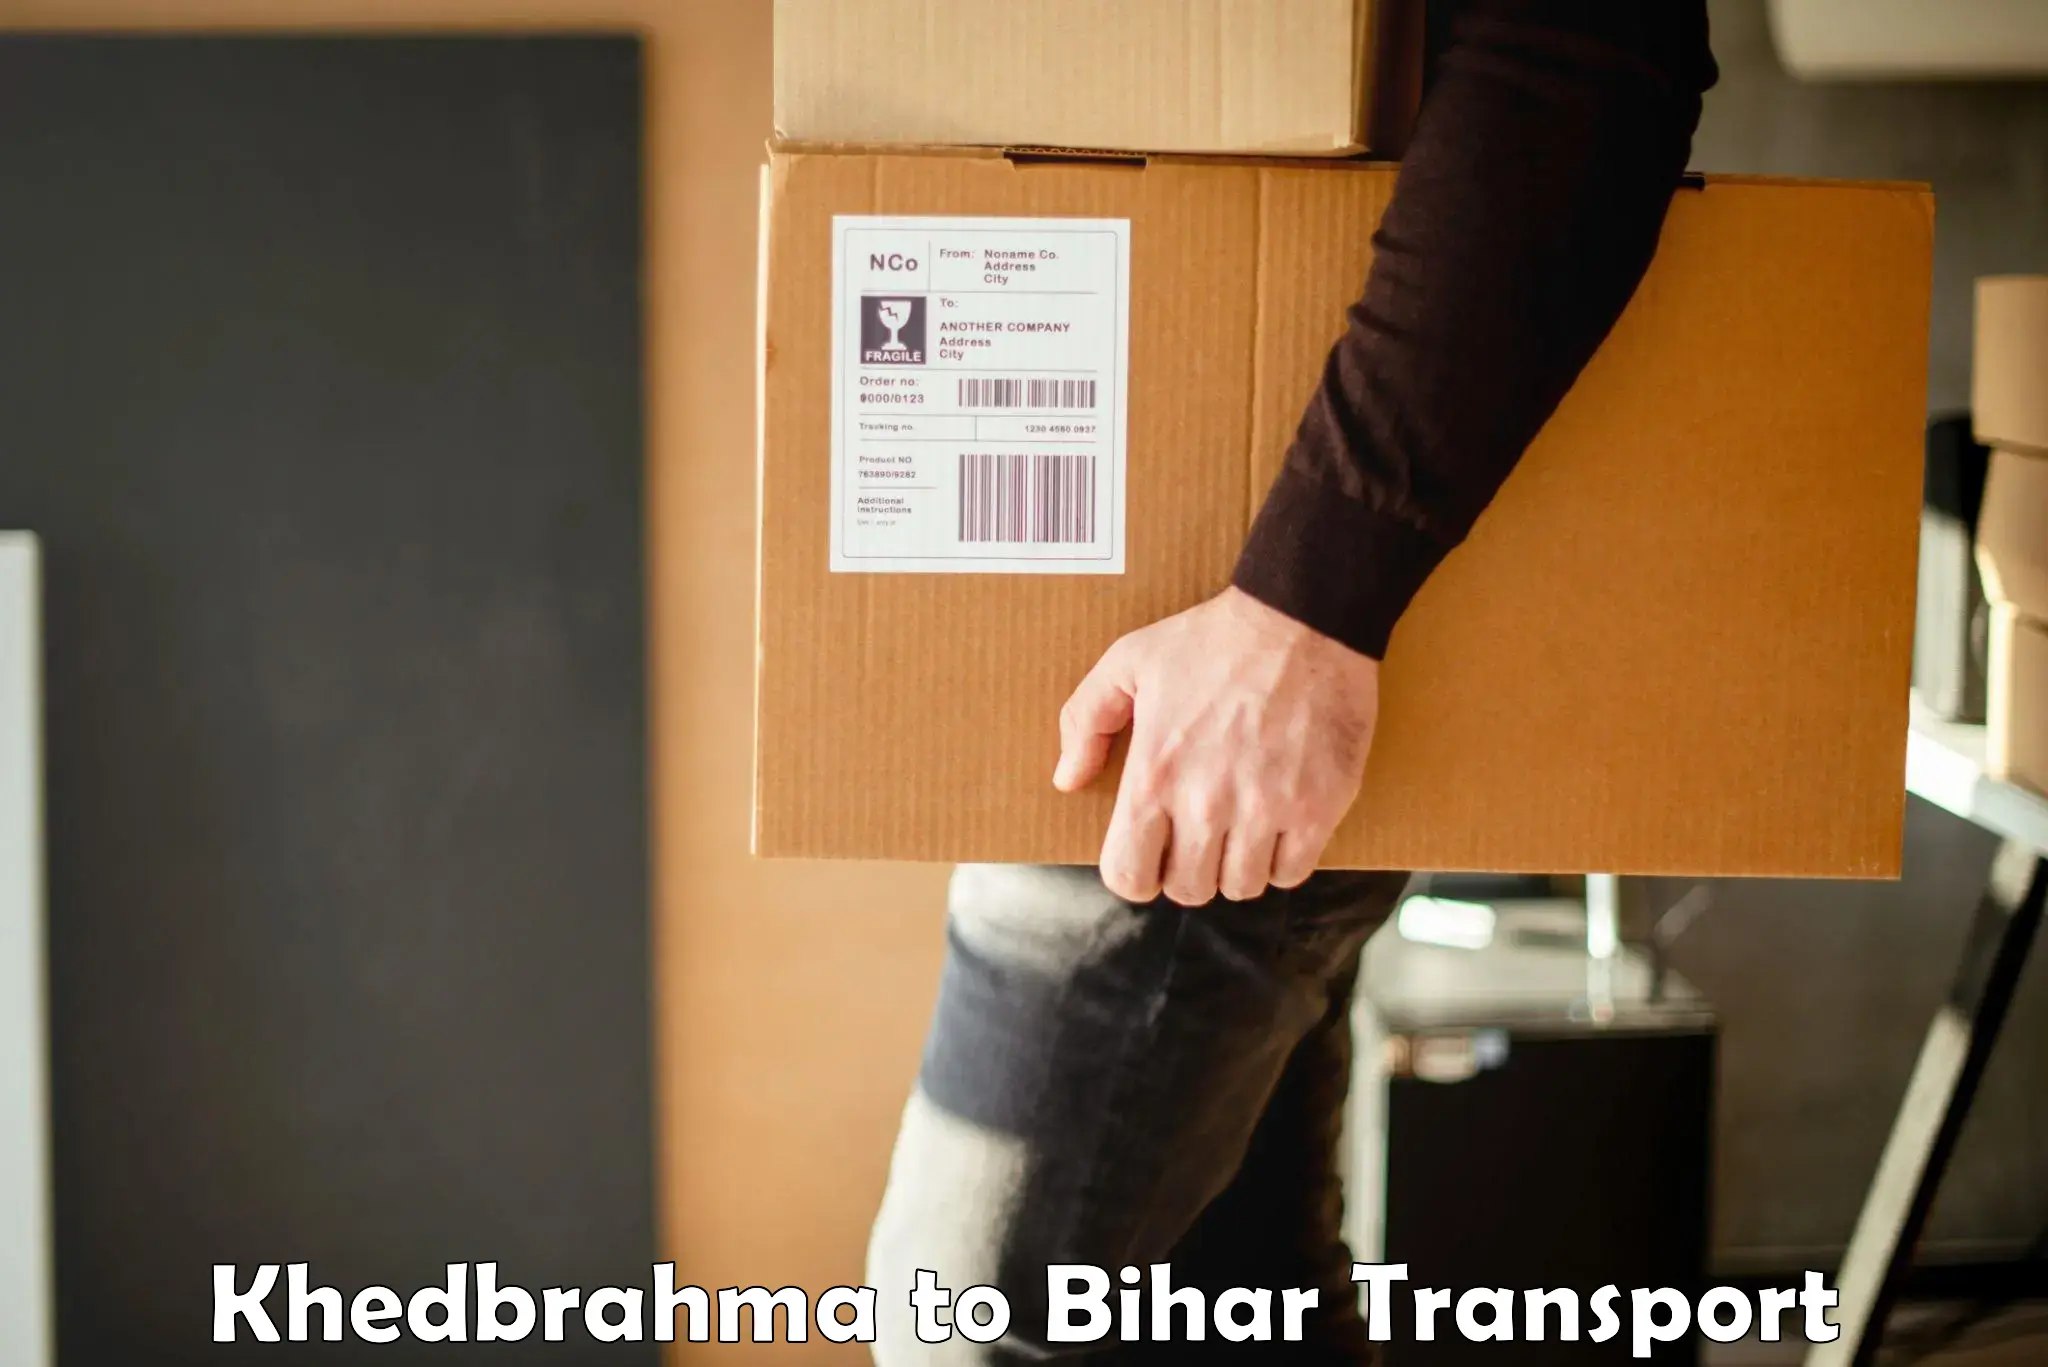 Pick up transport service in Khedbrahma to East Champaran